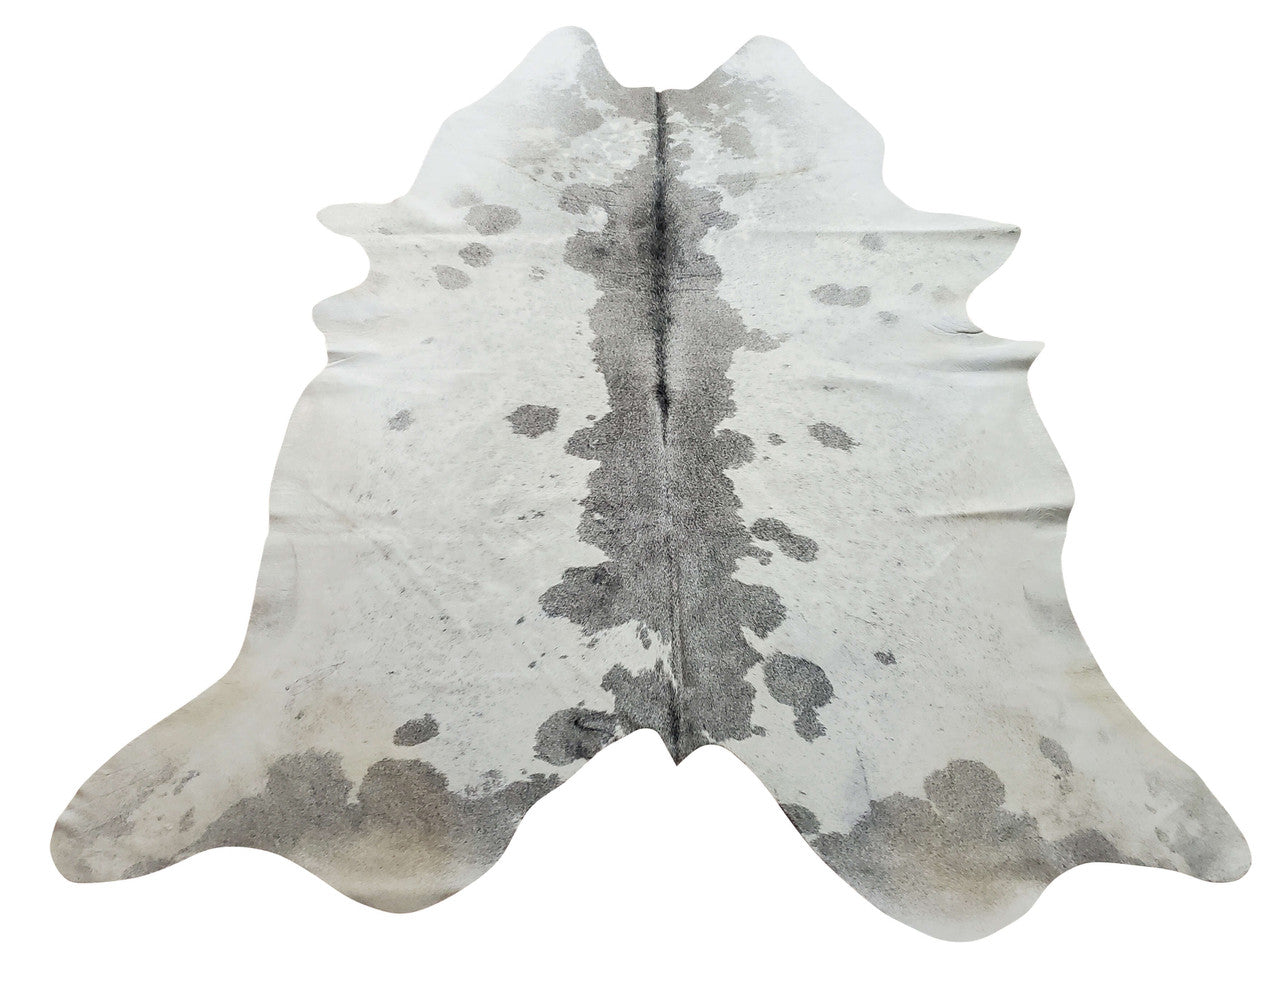 This cowhide rug is perfect for custom bench, amazing to recover a design project. You will receive a lovely natural cowhide with quick shipping and great communication.
